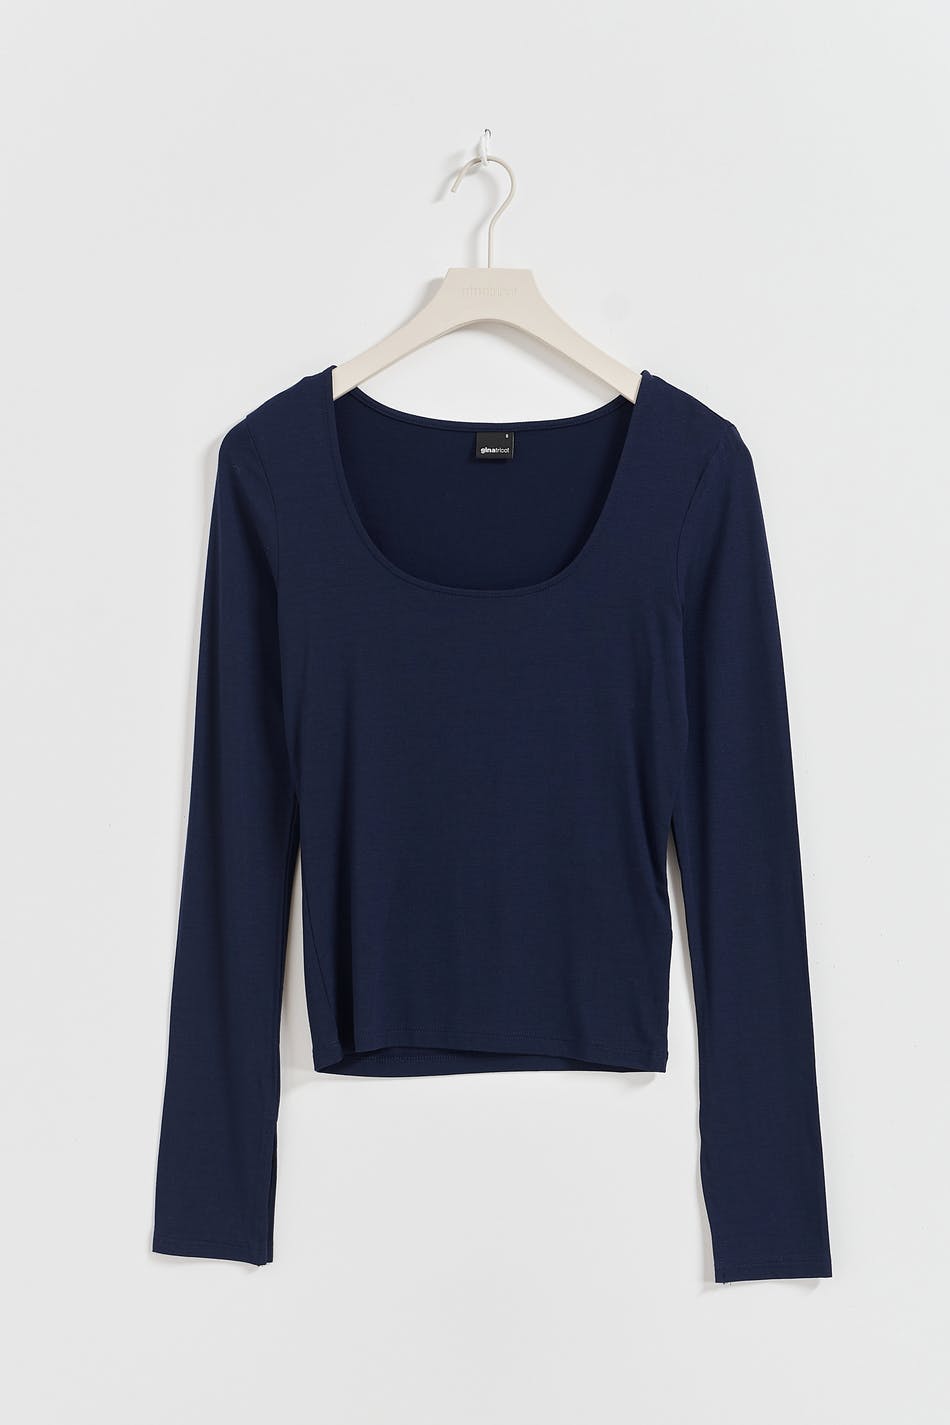 Gina Tricot - Soft touch jersey top - Langærmede toppe- Blue - L - Female